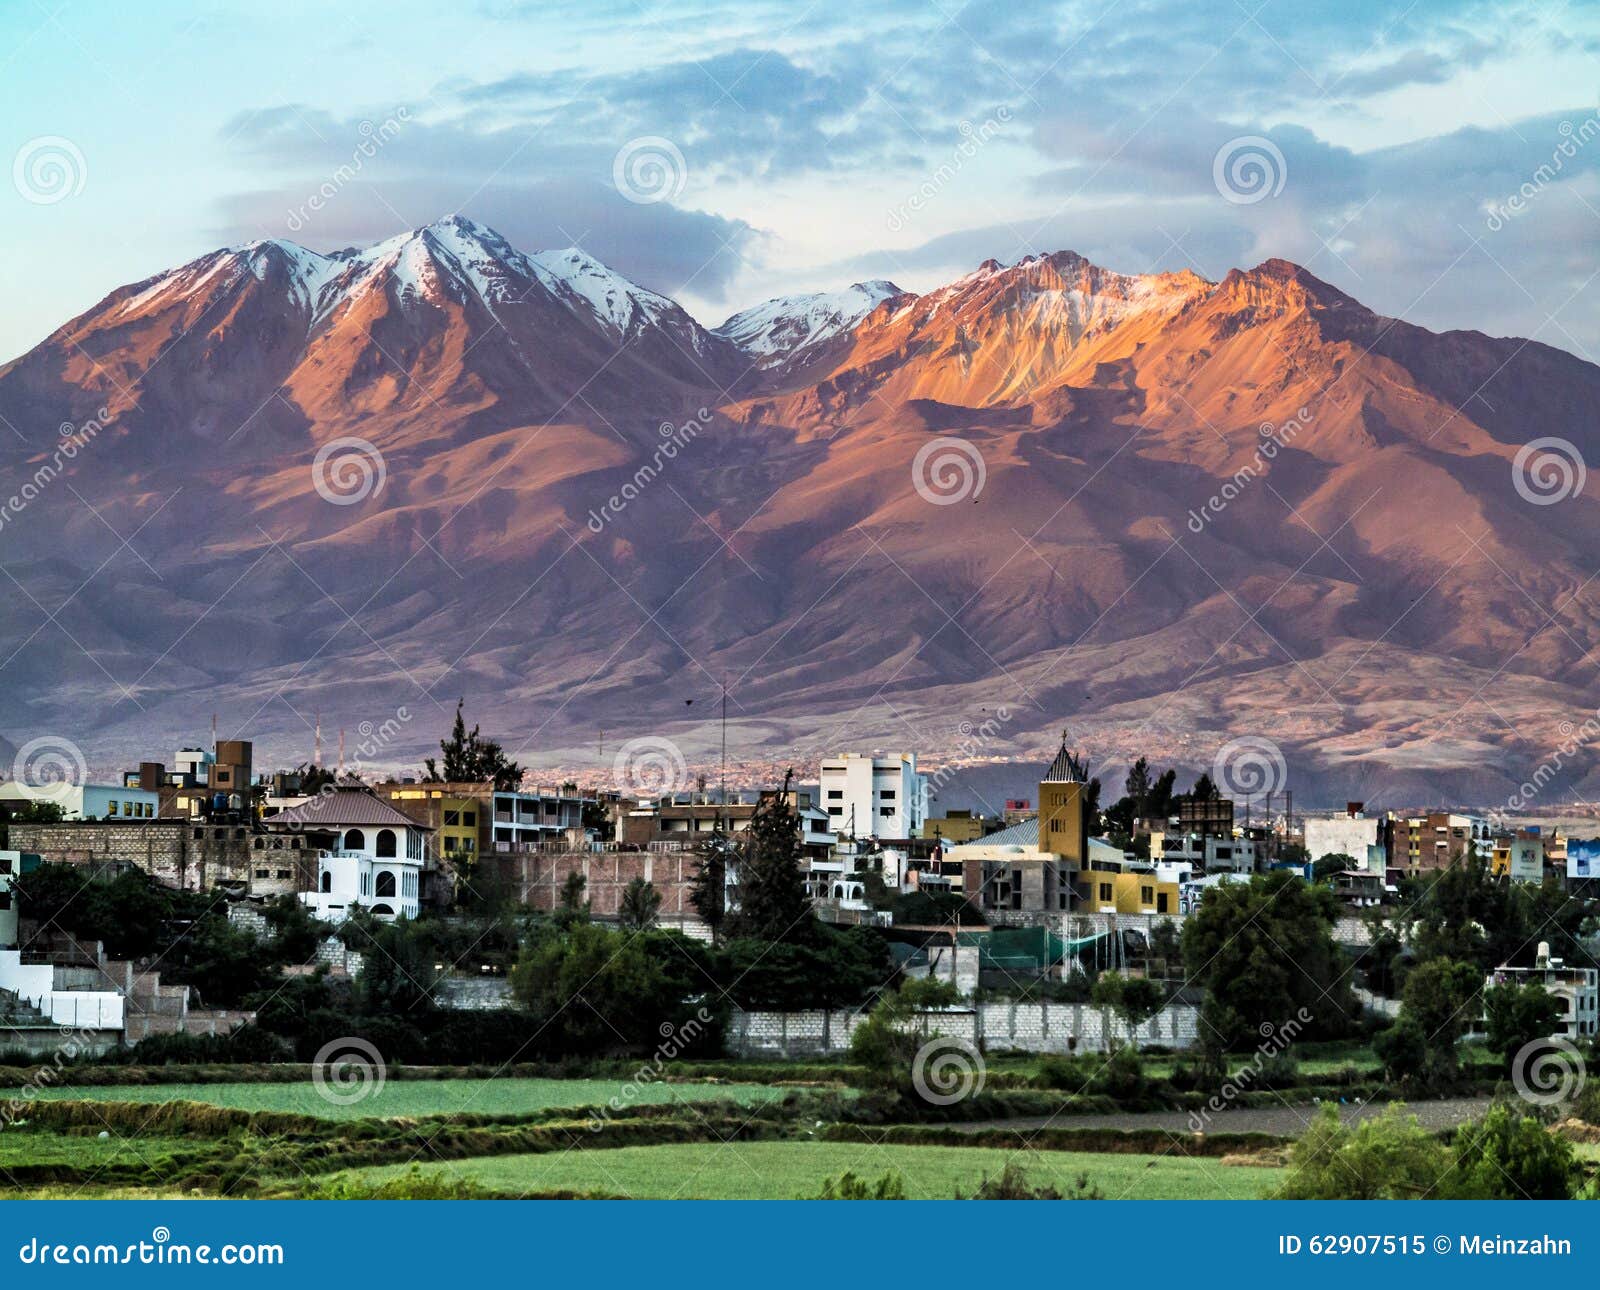 arequipa, peru with its iconic volcano chachani in the background